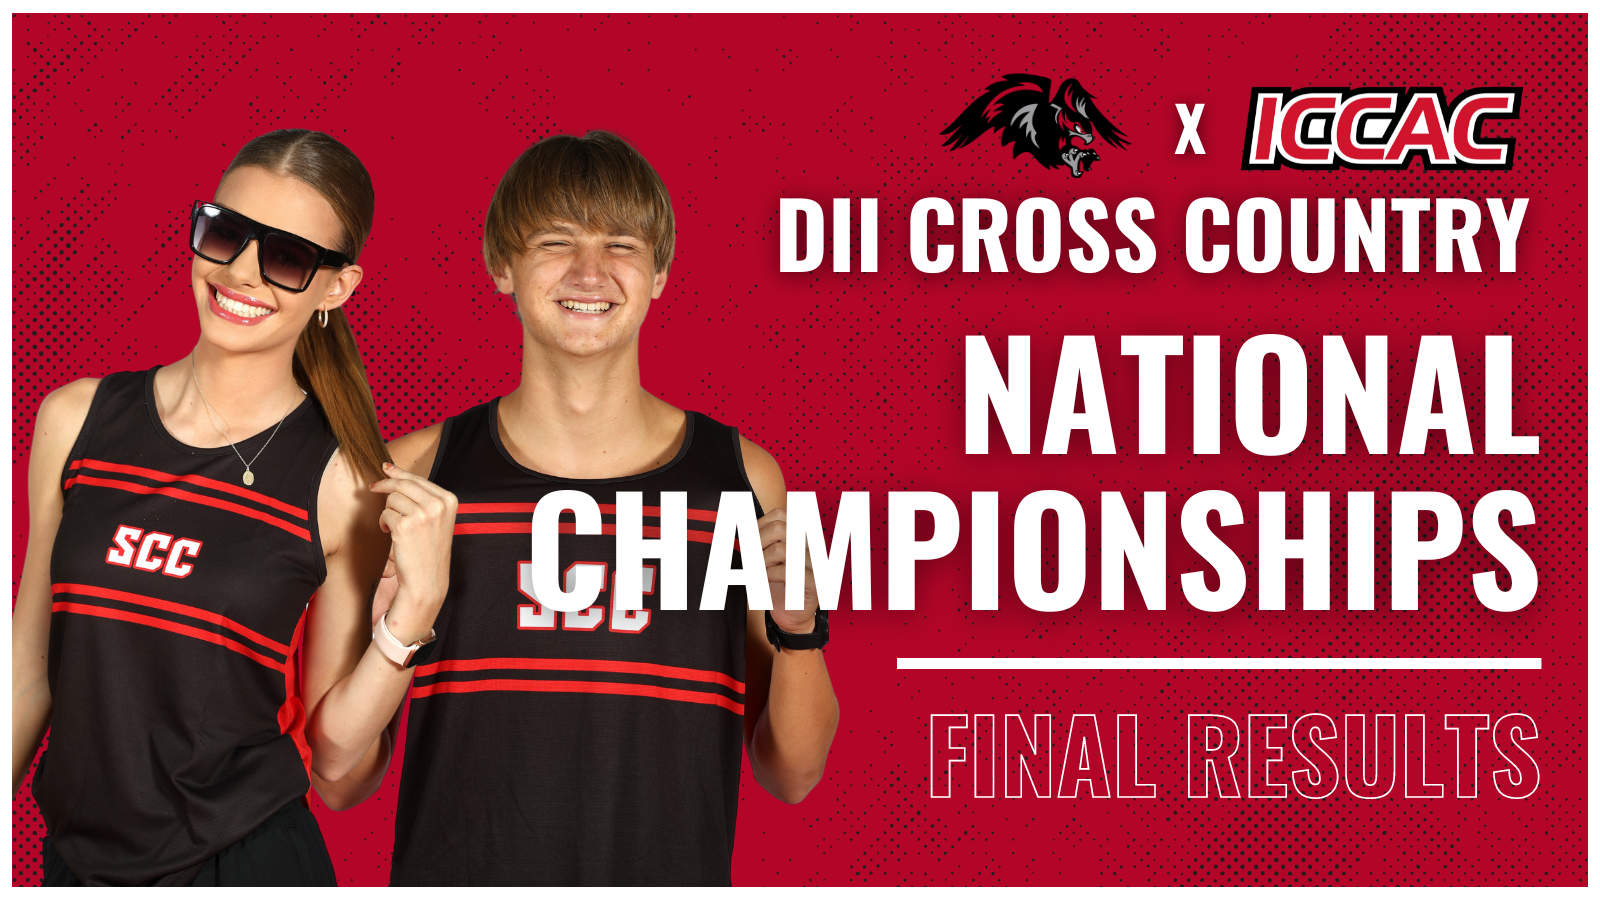 RESULTS FROM THE 2023 MEN'S & WOMEN'S CROSS COUNTRY CHAMPIONSHIPS